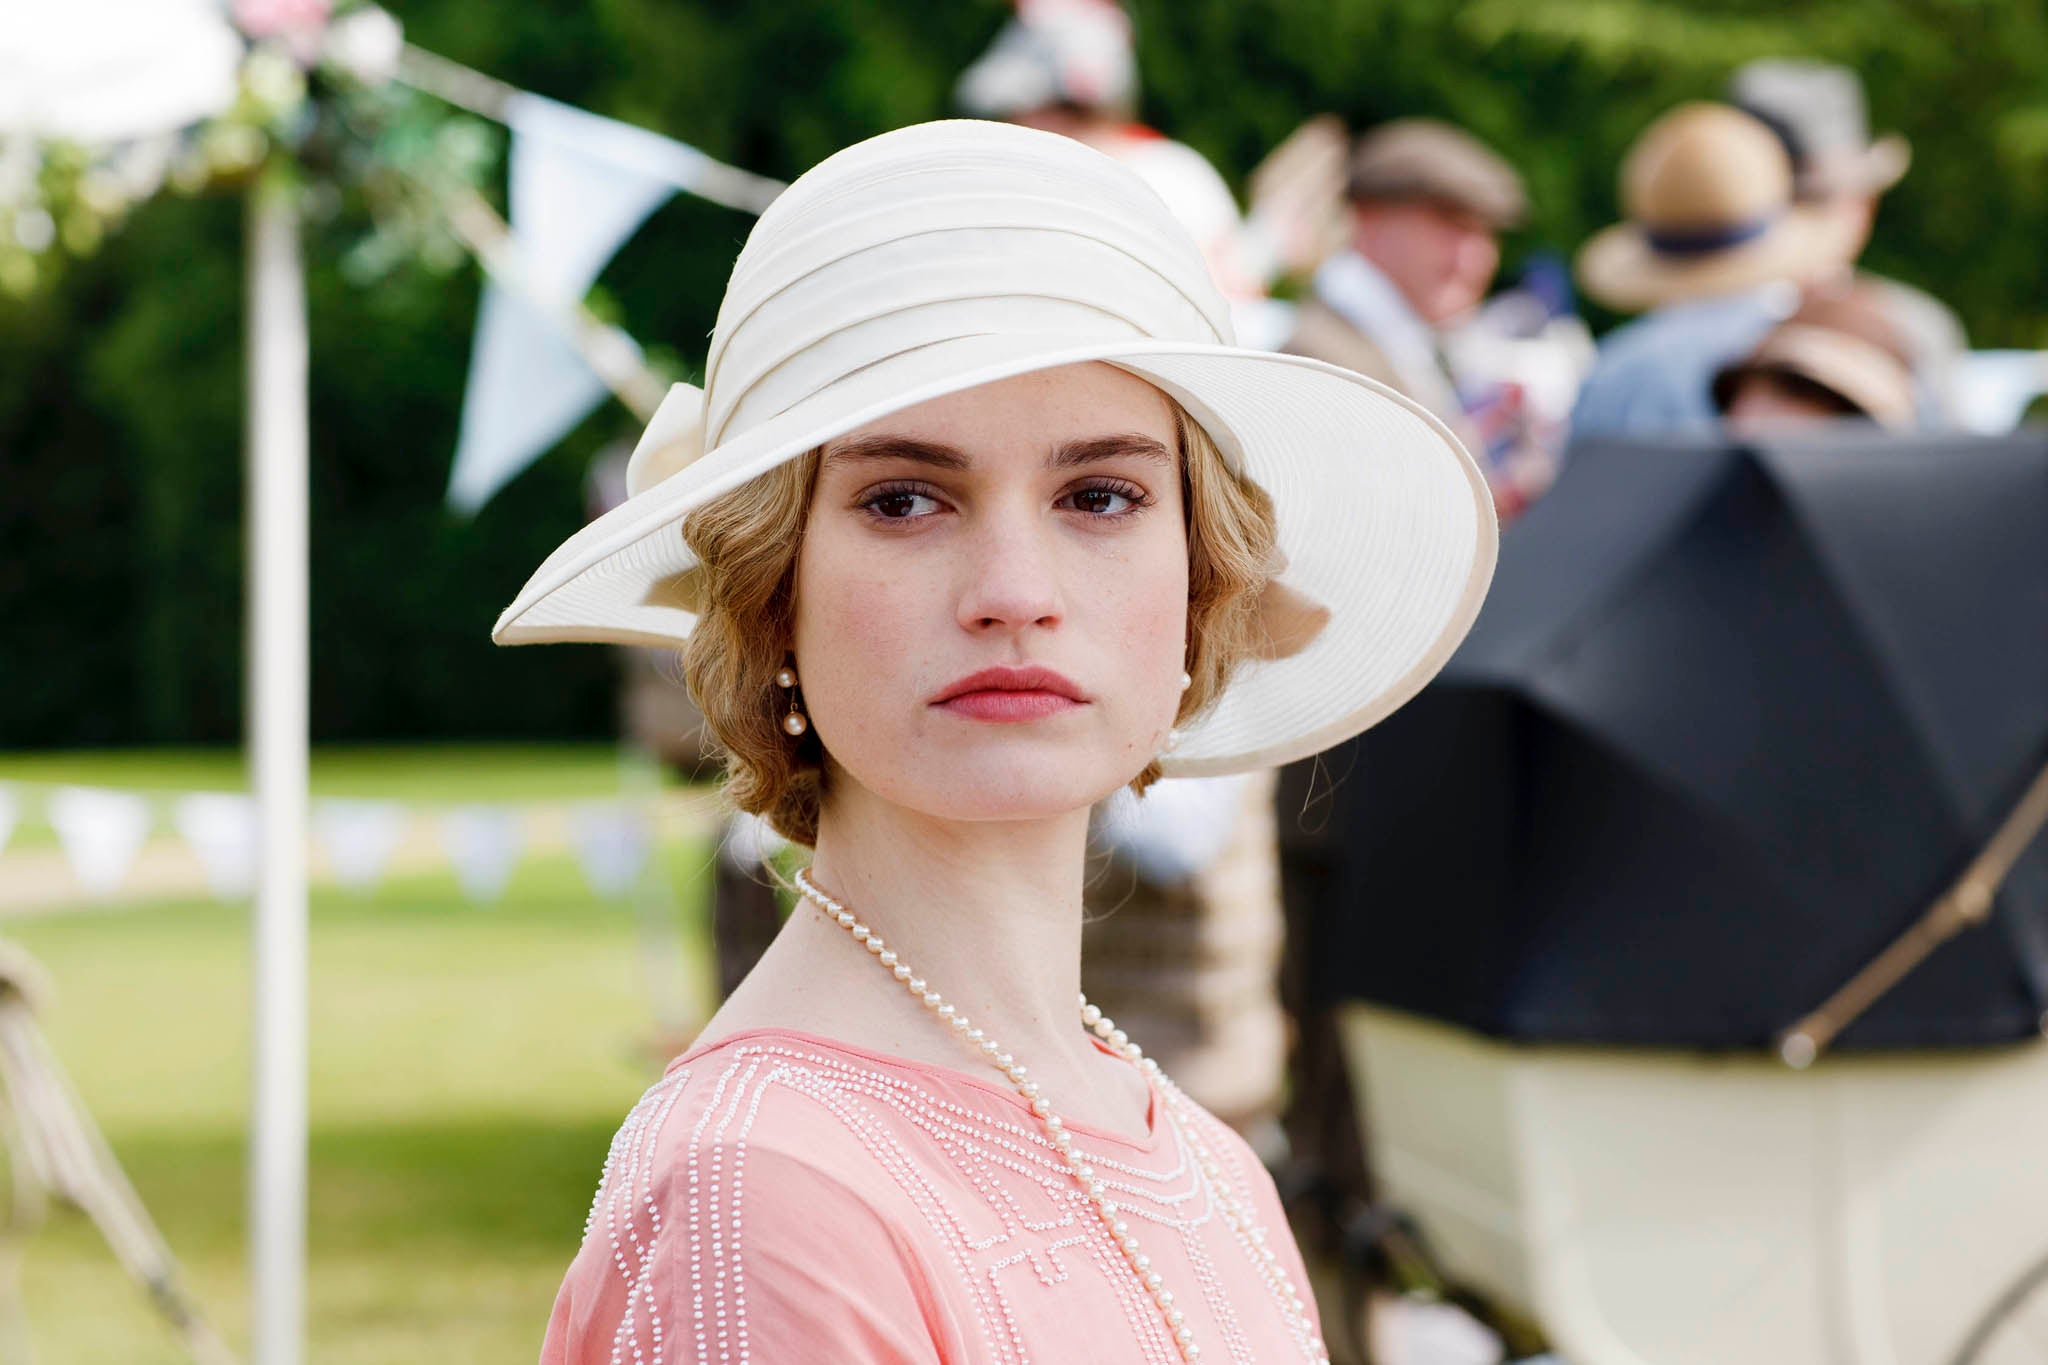 A defiant Lady Rose vows to marry Jack Ross in Downton Abbey